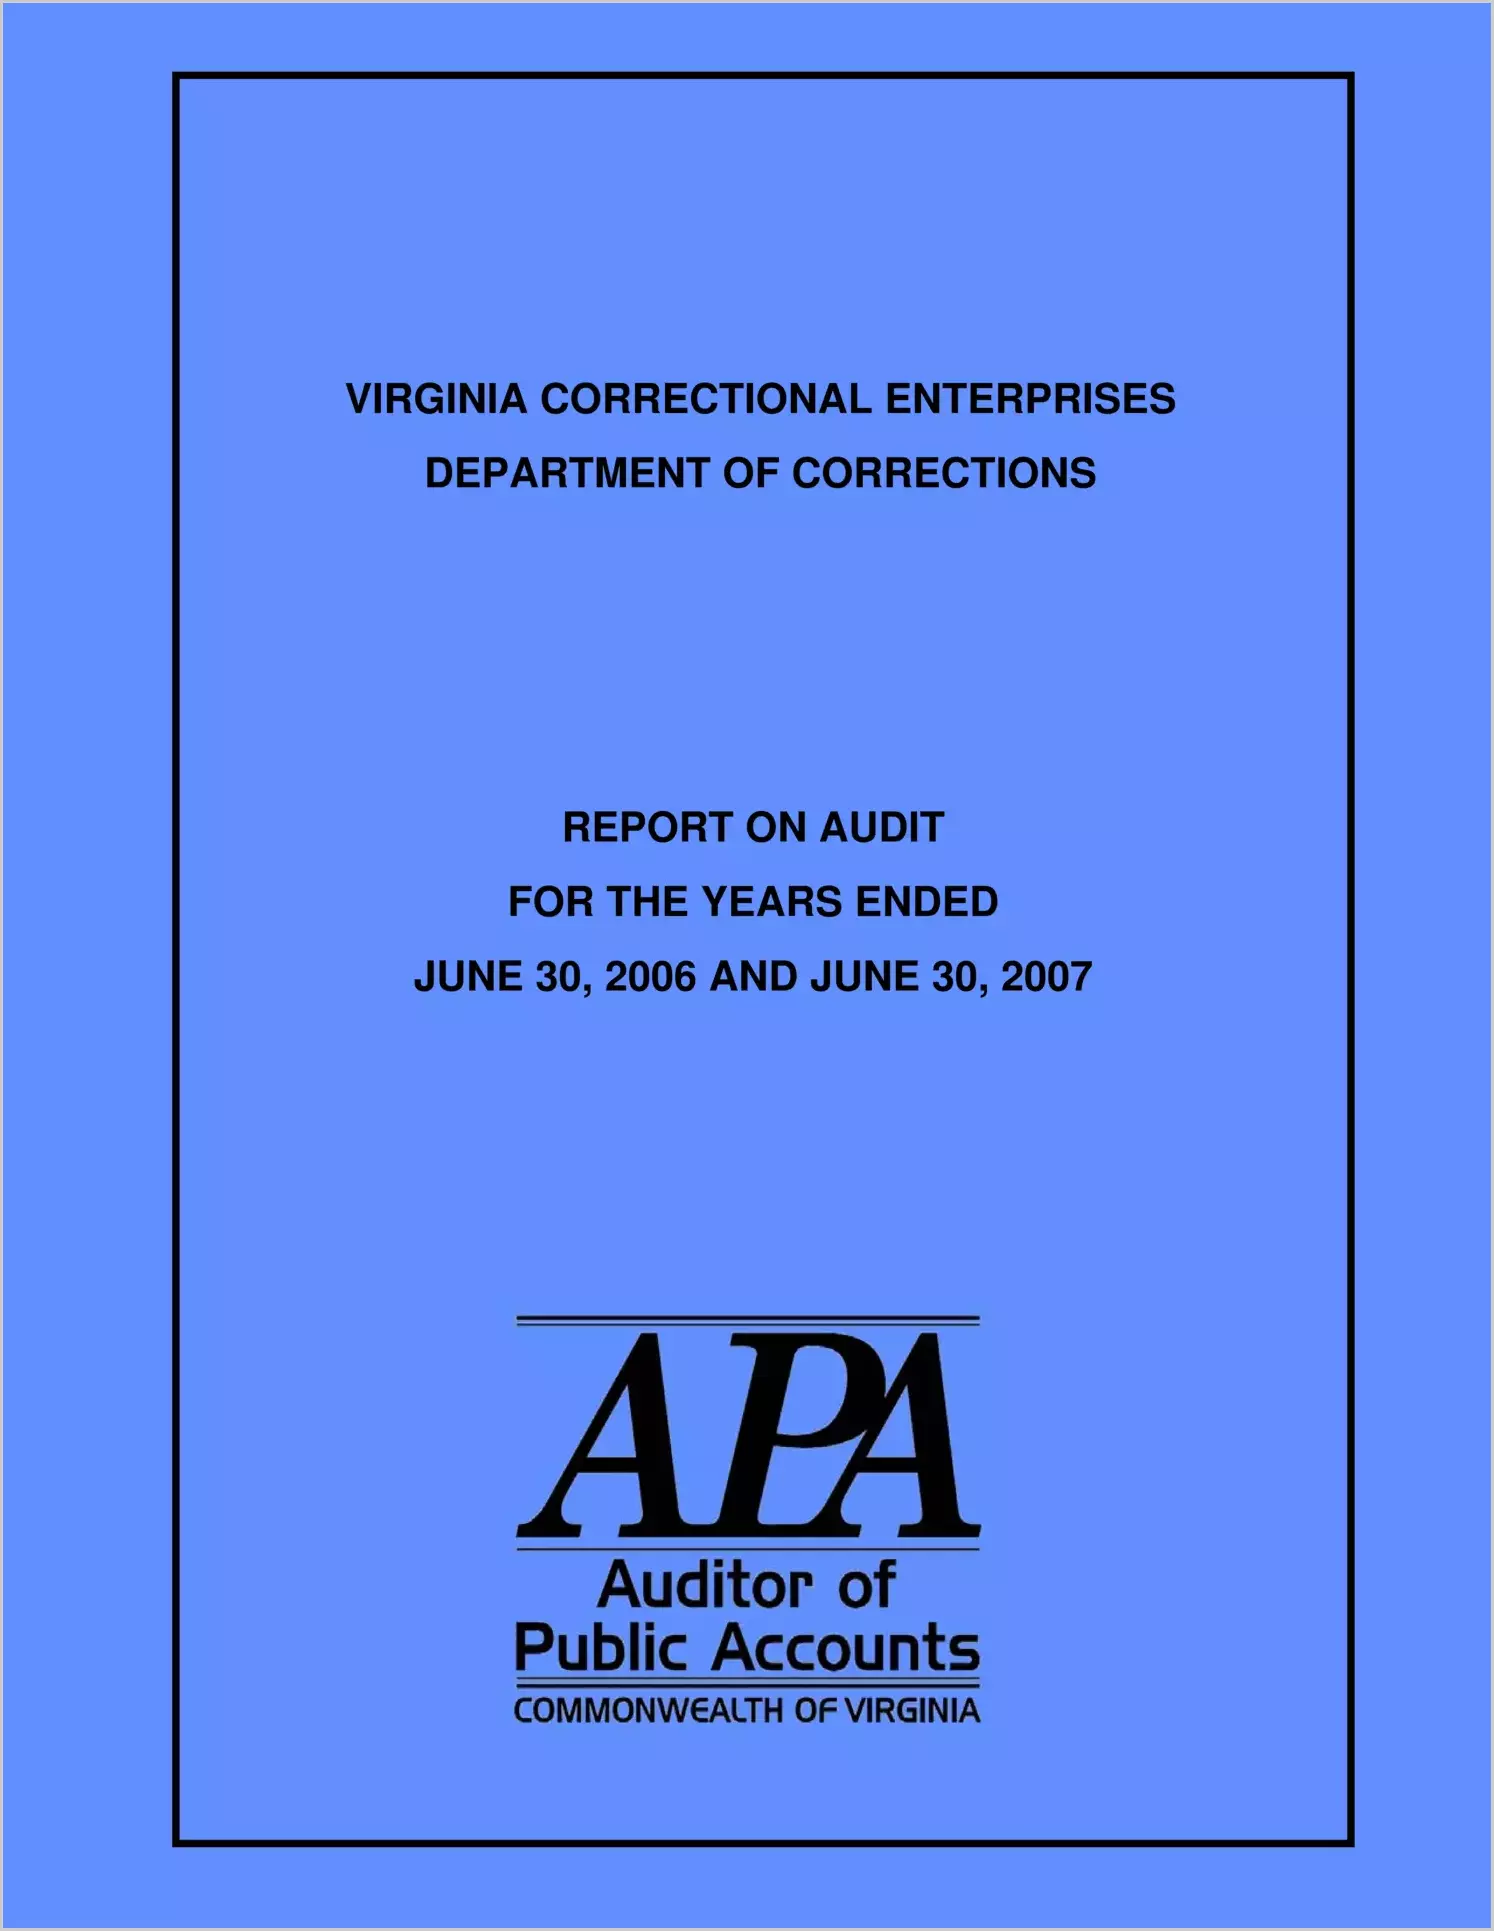 Virginia Correctional Enterprises Department of Corrections for the Year Endeds June 30, 2006 and June 30, 2007